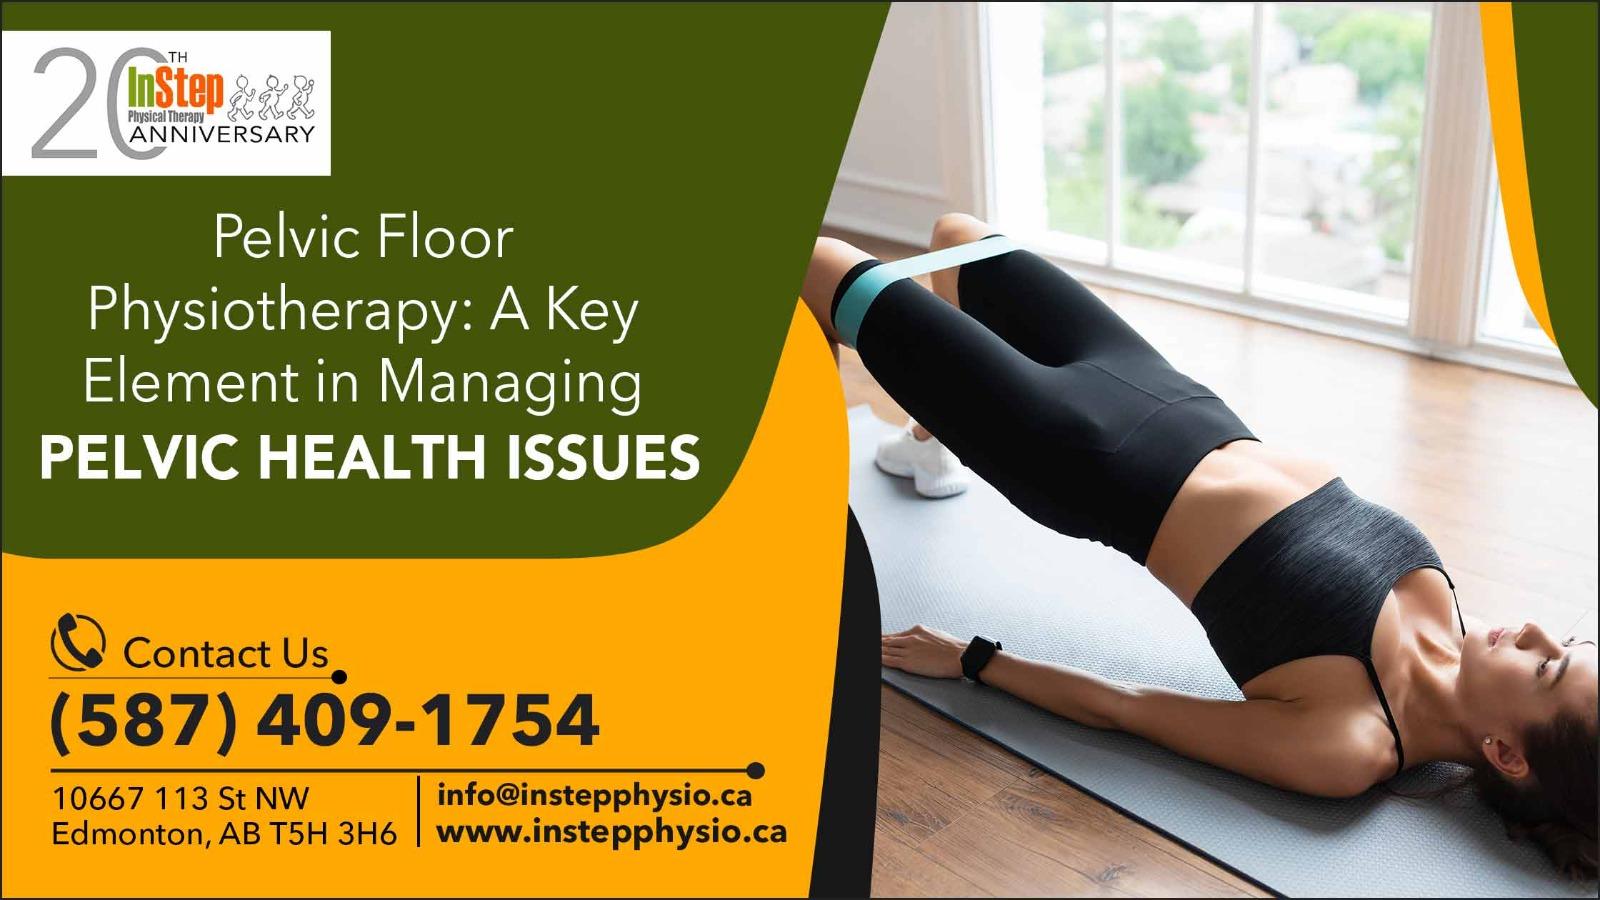 Pelvic Floor Physiotherapy A Key Element in Managing Pelvic Health Issues